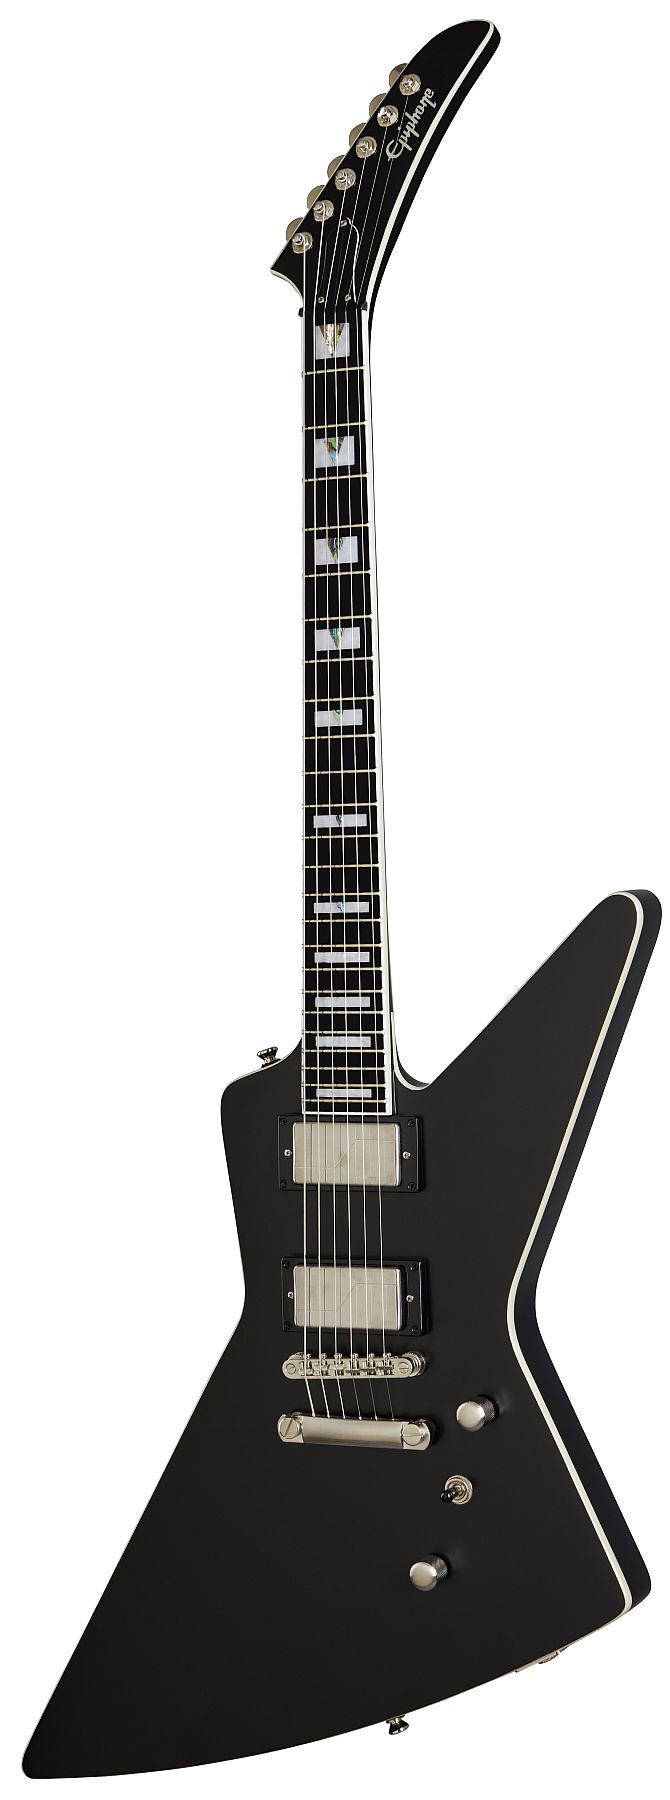 Epiphone PROPHECY EXTURA Series Electric Guitar (Black Aged Gloss)